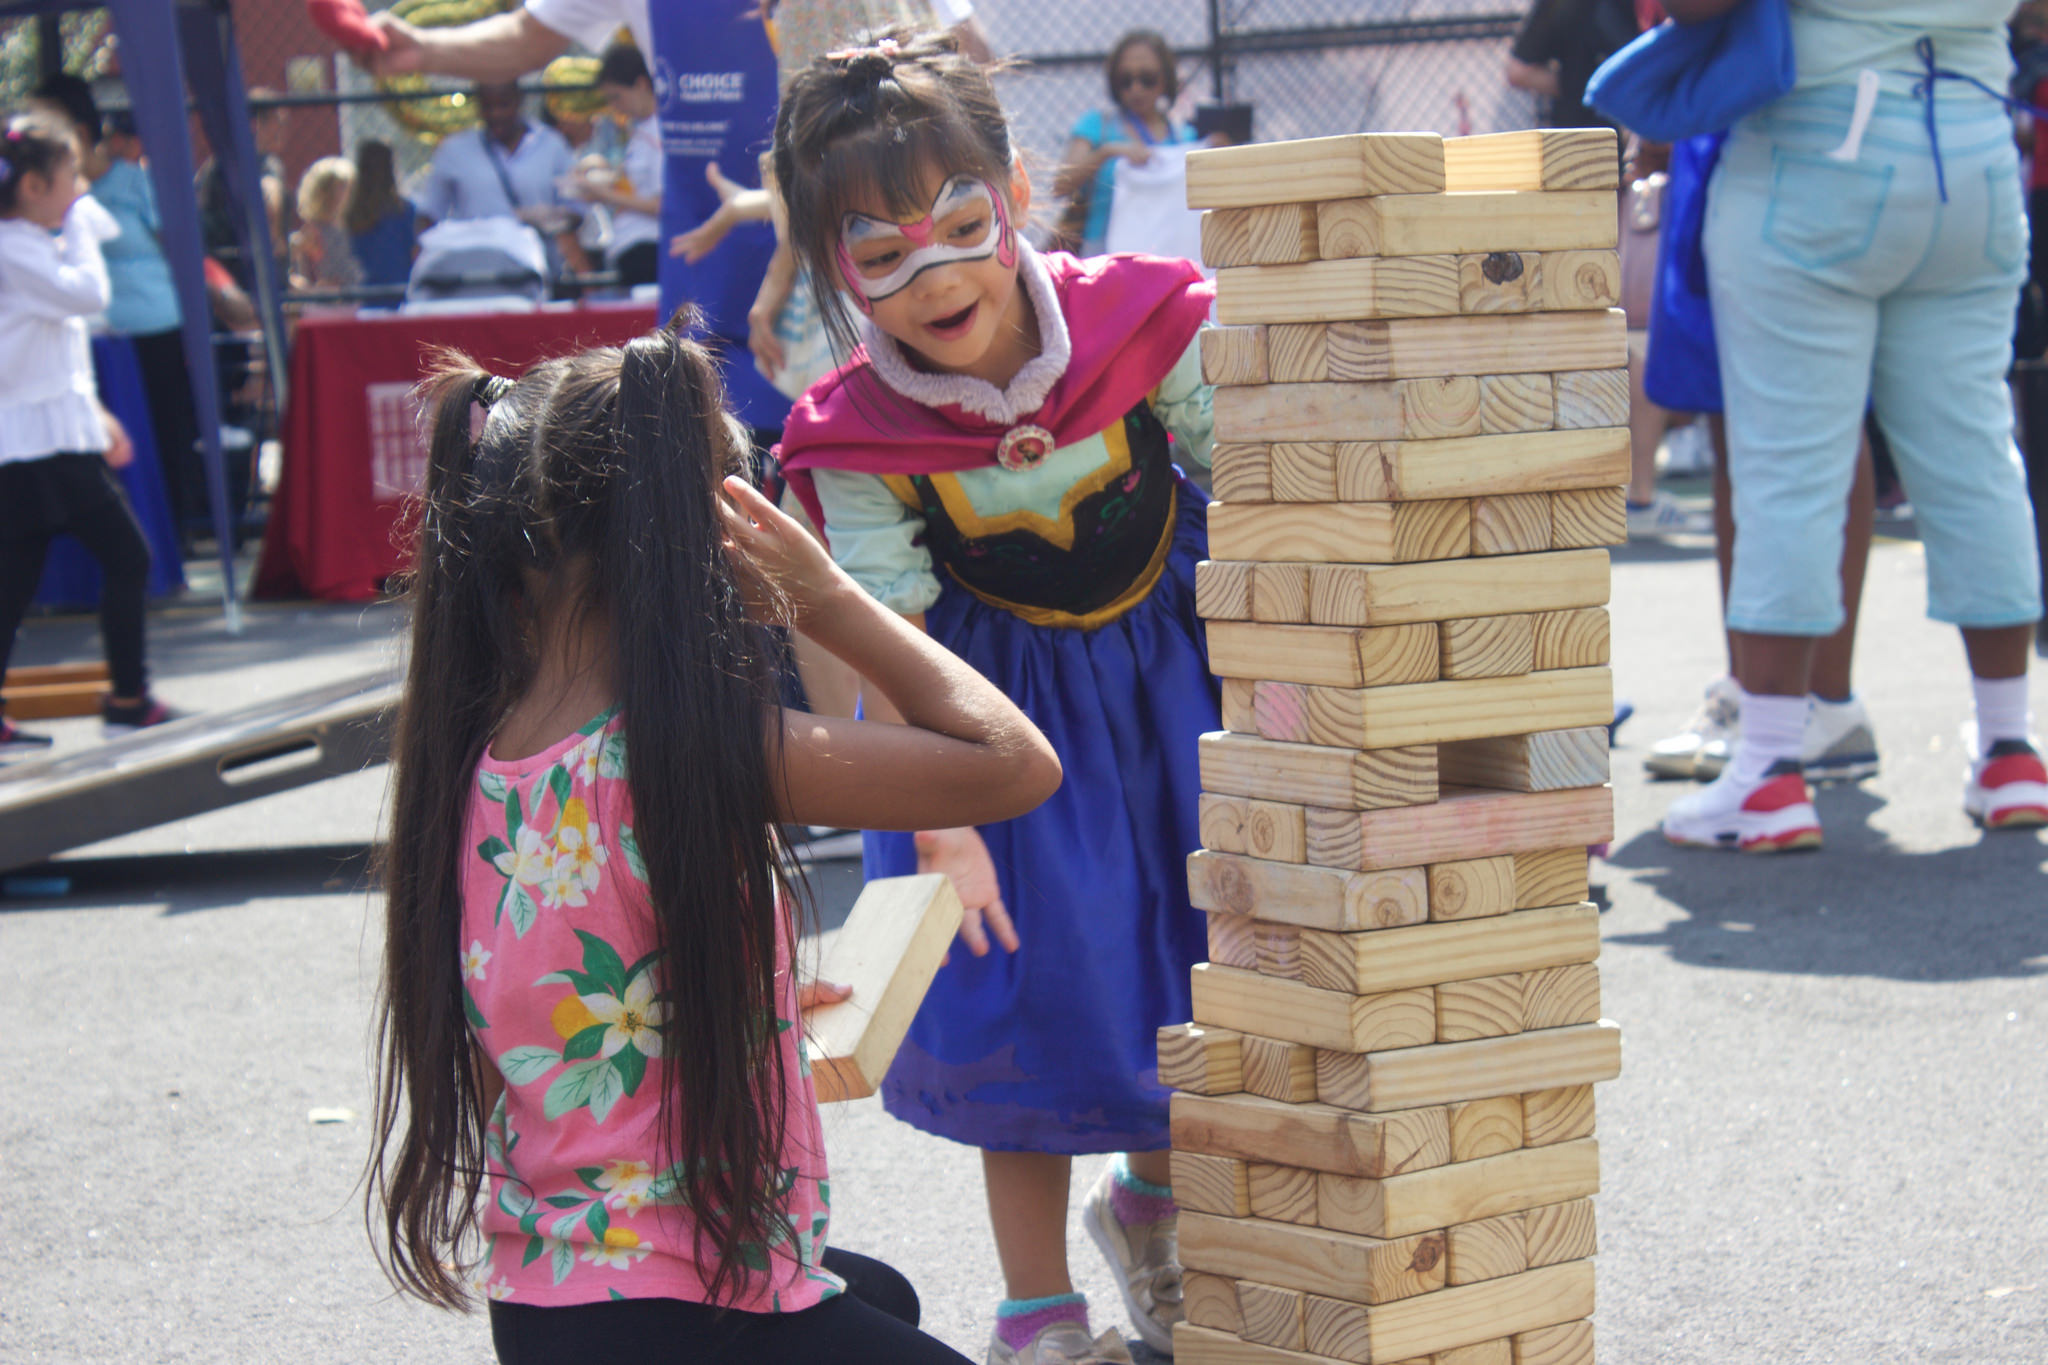 Children play in candid event photo from Henry Street Settlement Community Day event, September 2018